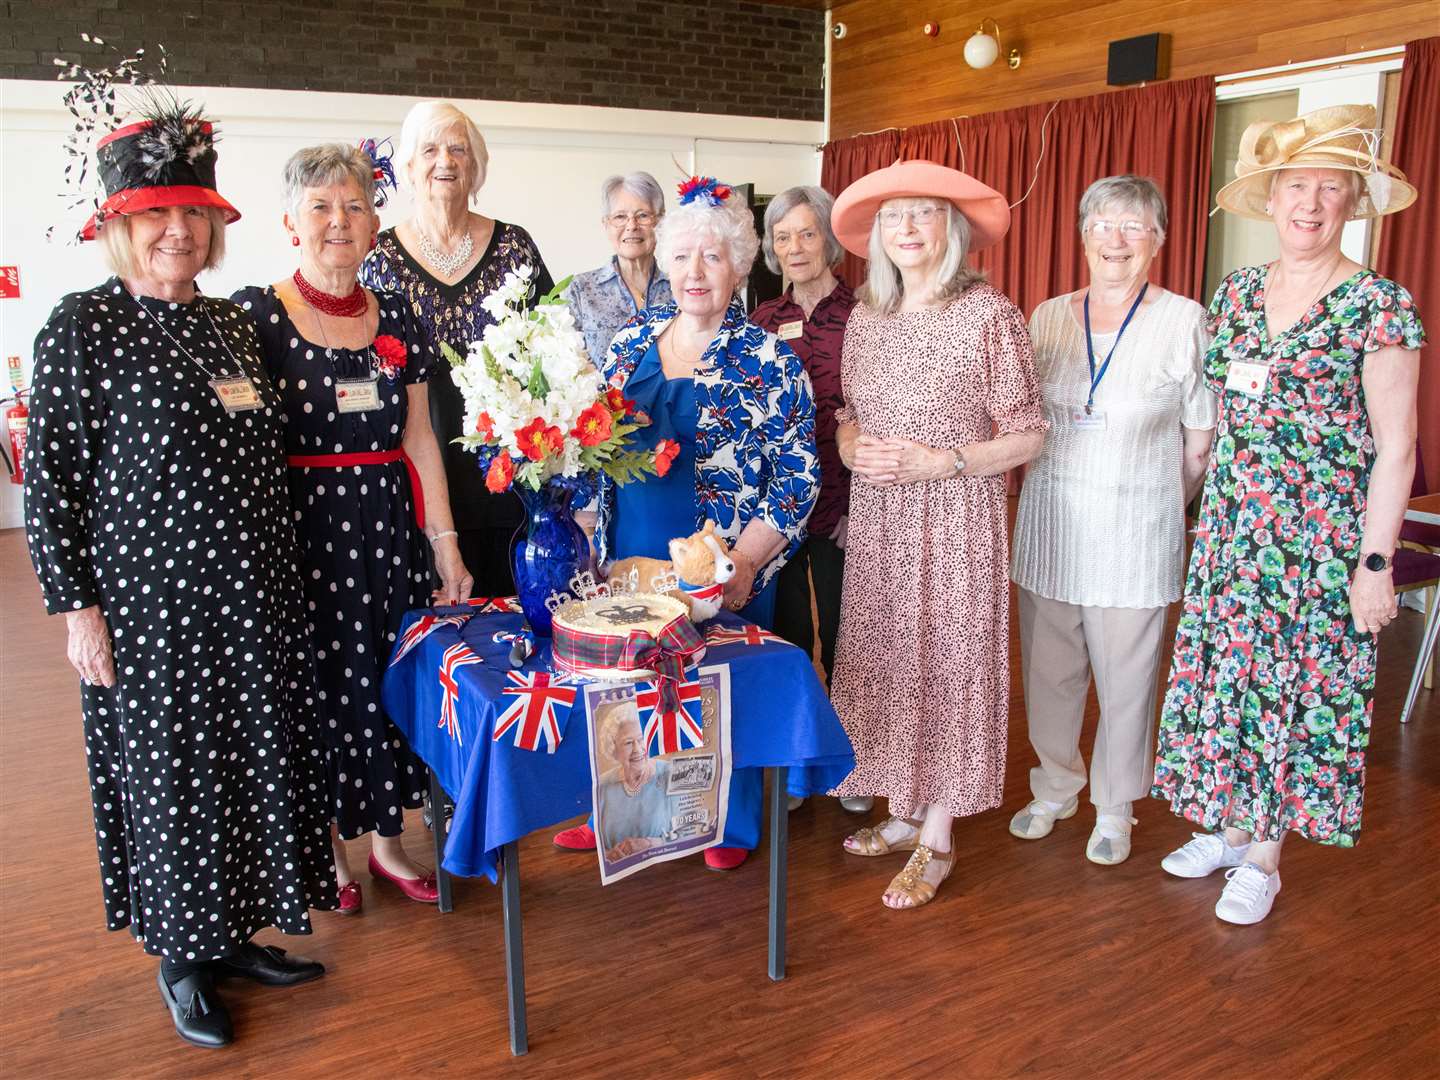 The group enjoyed a party fit for a Queen. Picture: Daniel Forsyth